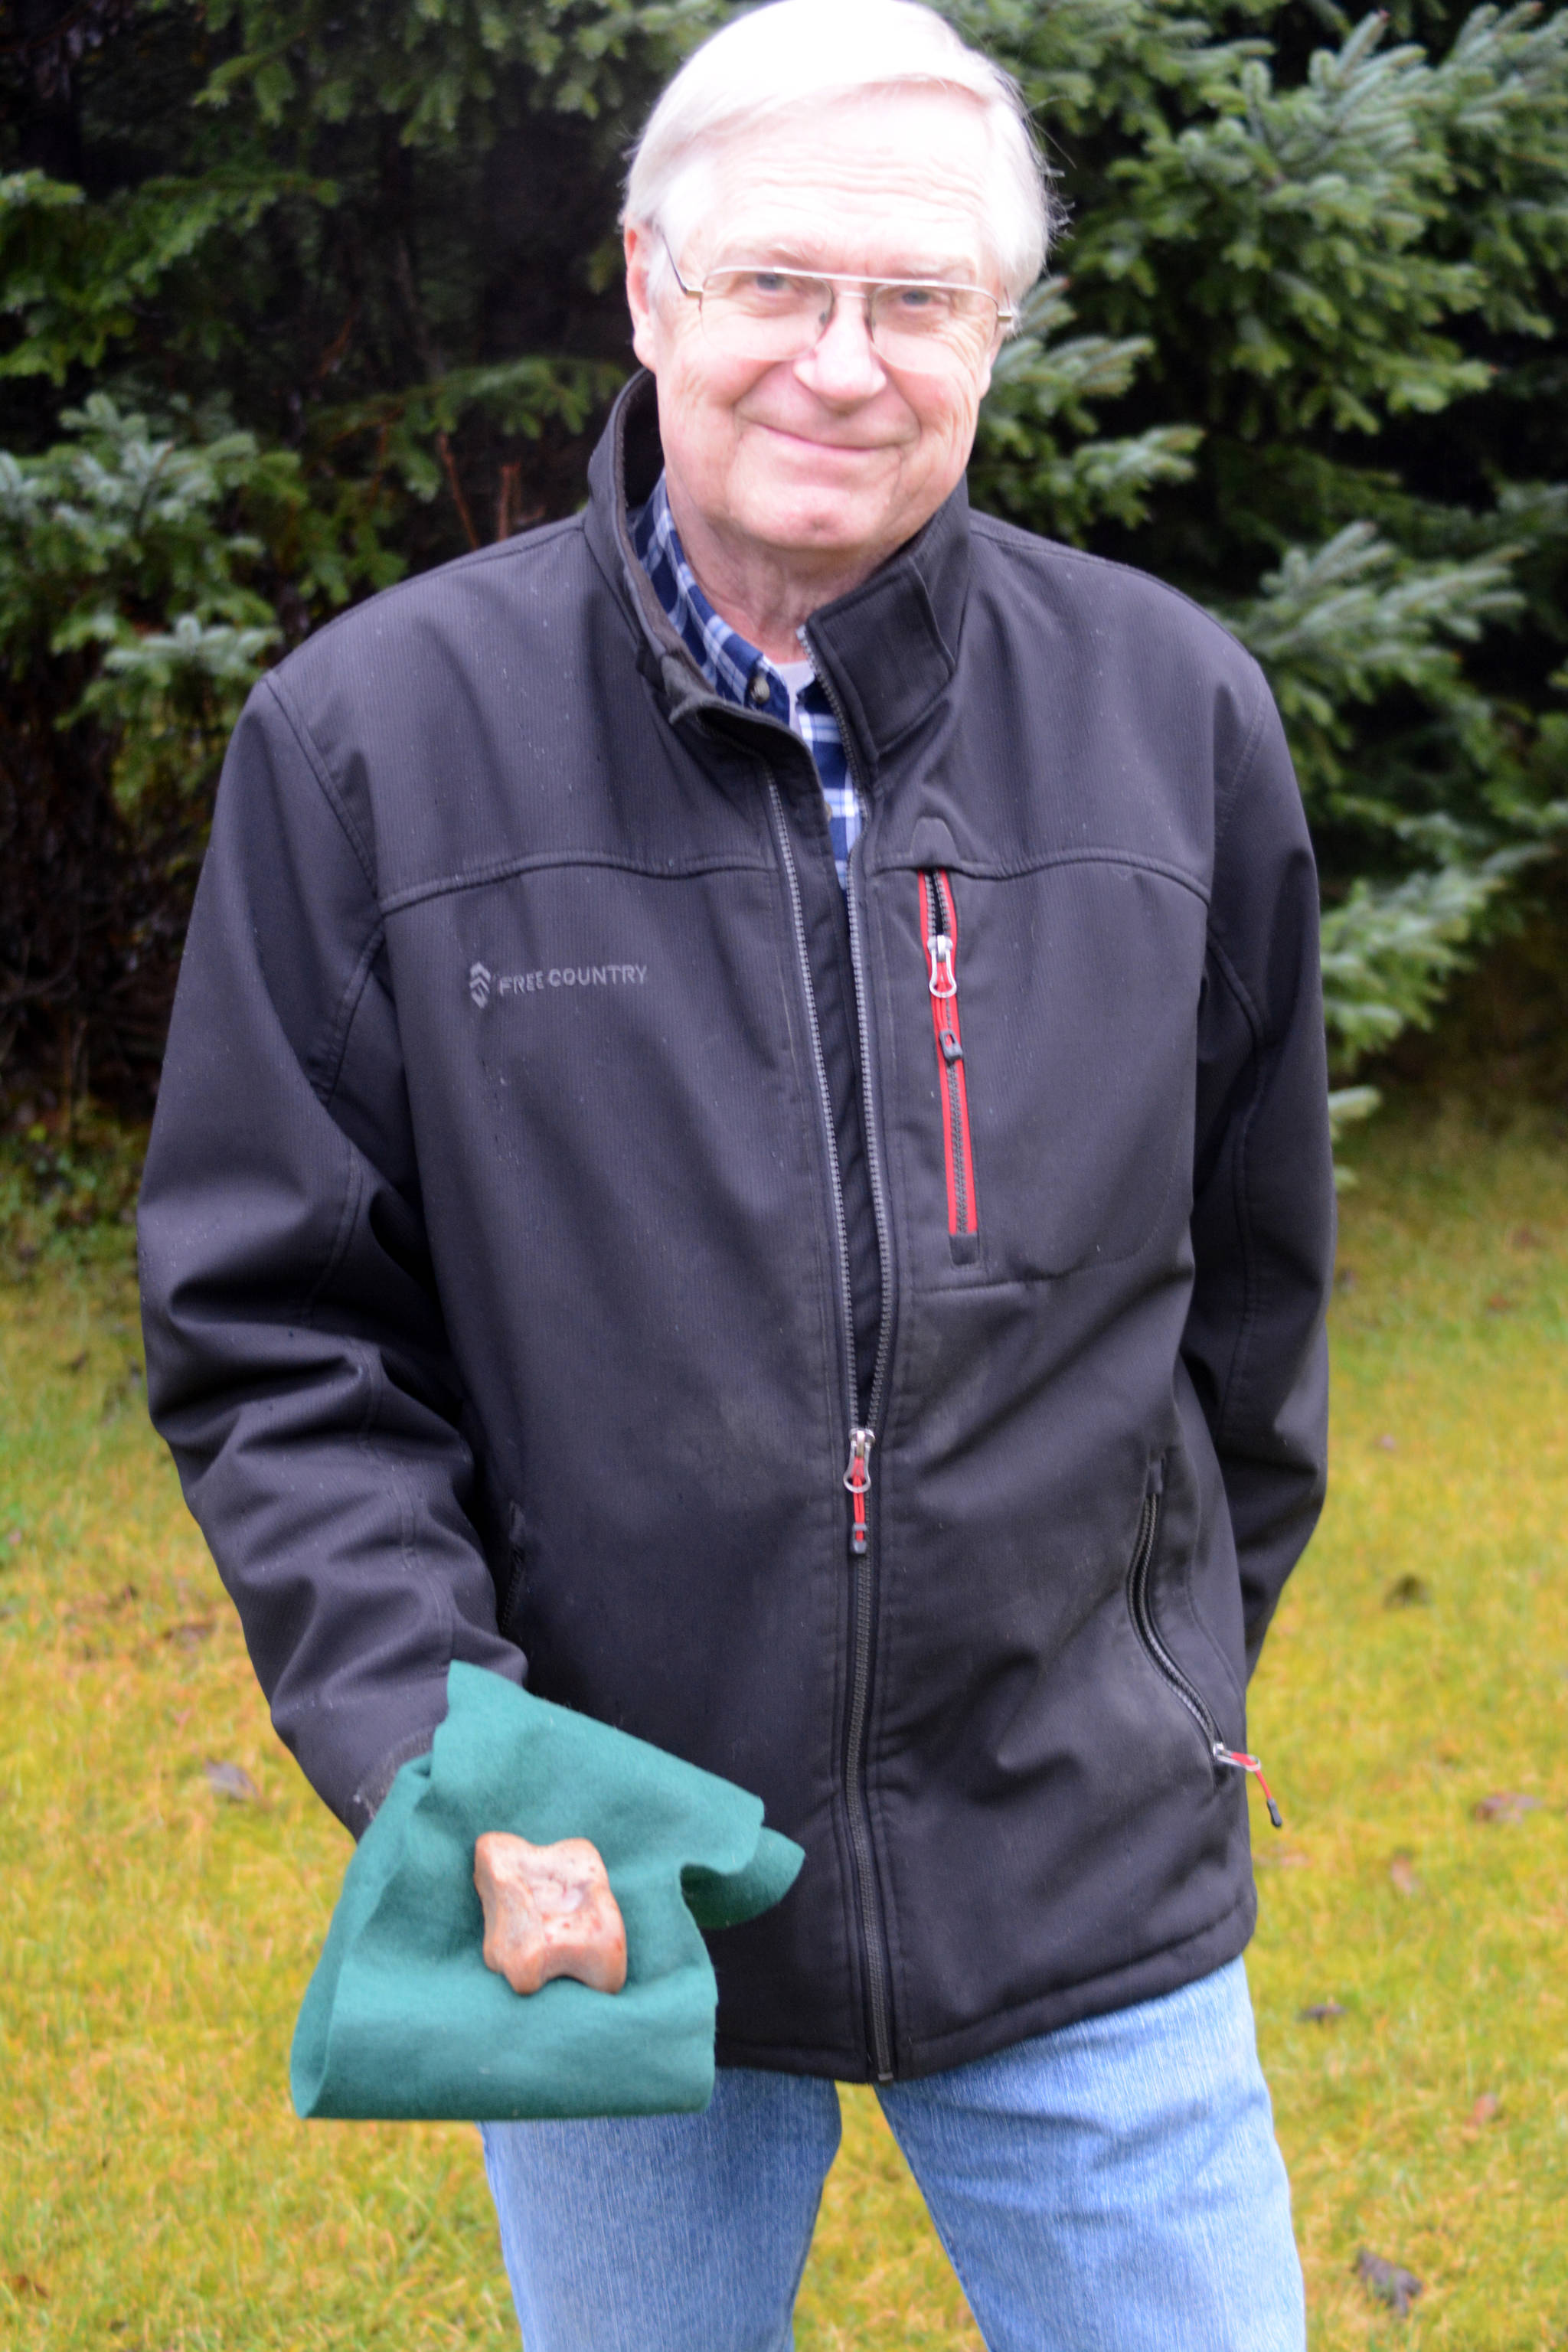 In this photo taken on Nov. 26, 2018, Don Henry holds an astagalus, or ankle bone, he found on the Mud Bay side of the Homer Spit earlier this month. (Homer News file photo)